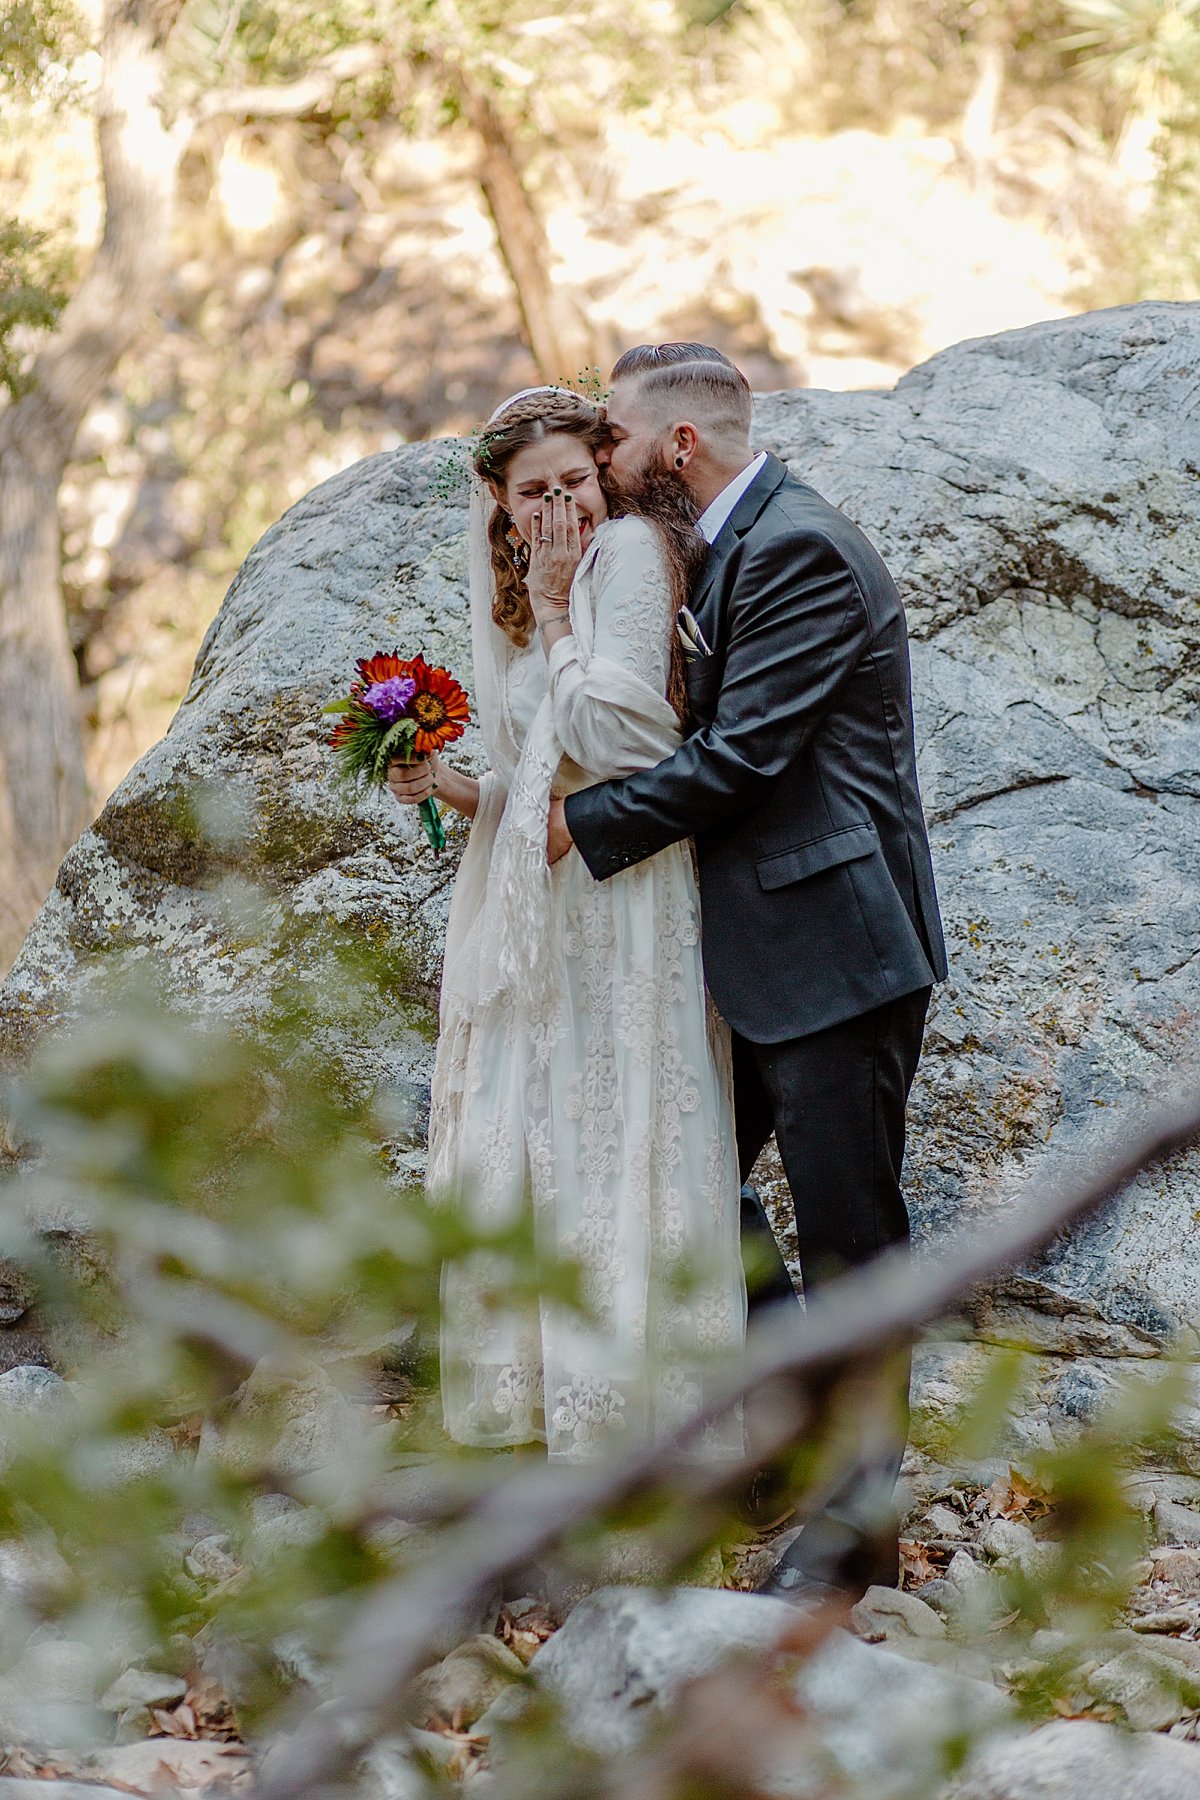  happy bride being held by groom under the trees in Madera canyon by Lucy Bouman 